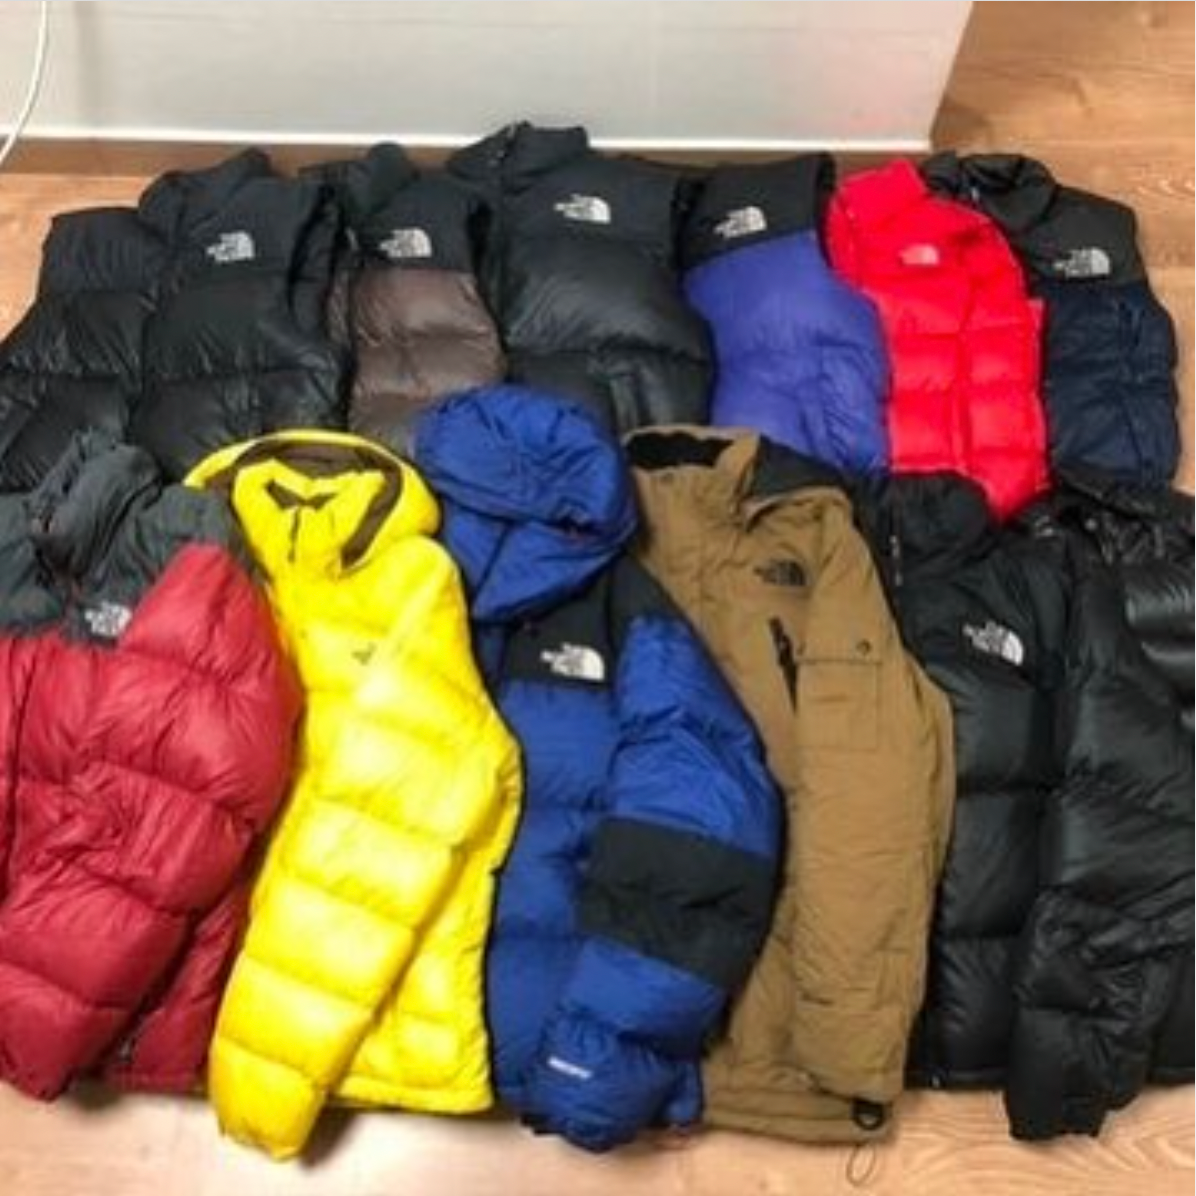 The North Face Puffer and Vest Mix Bundle - 12 pieces